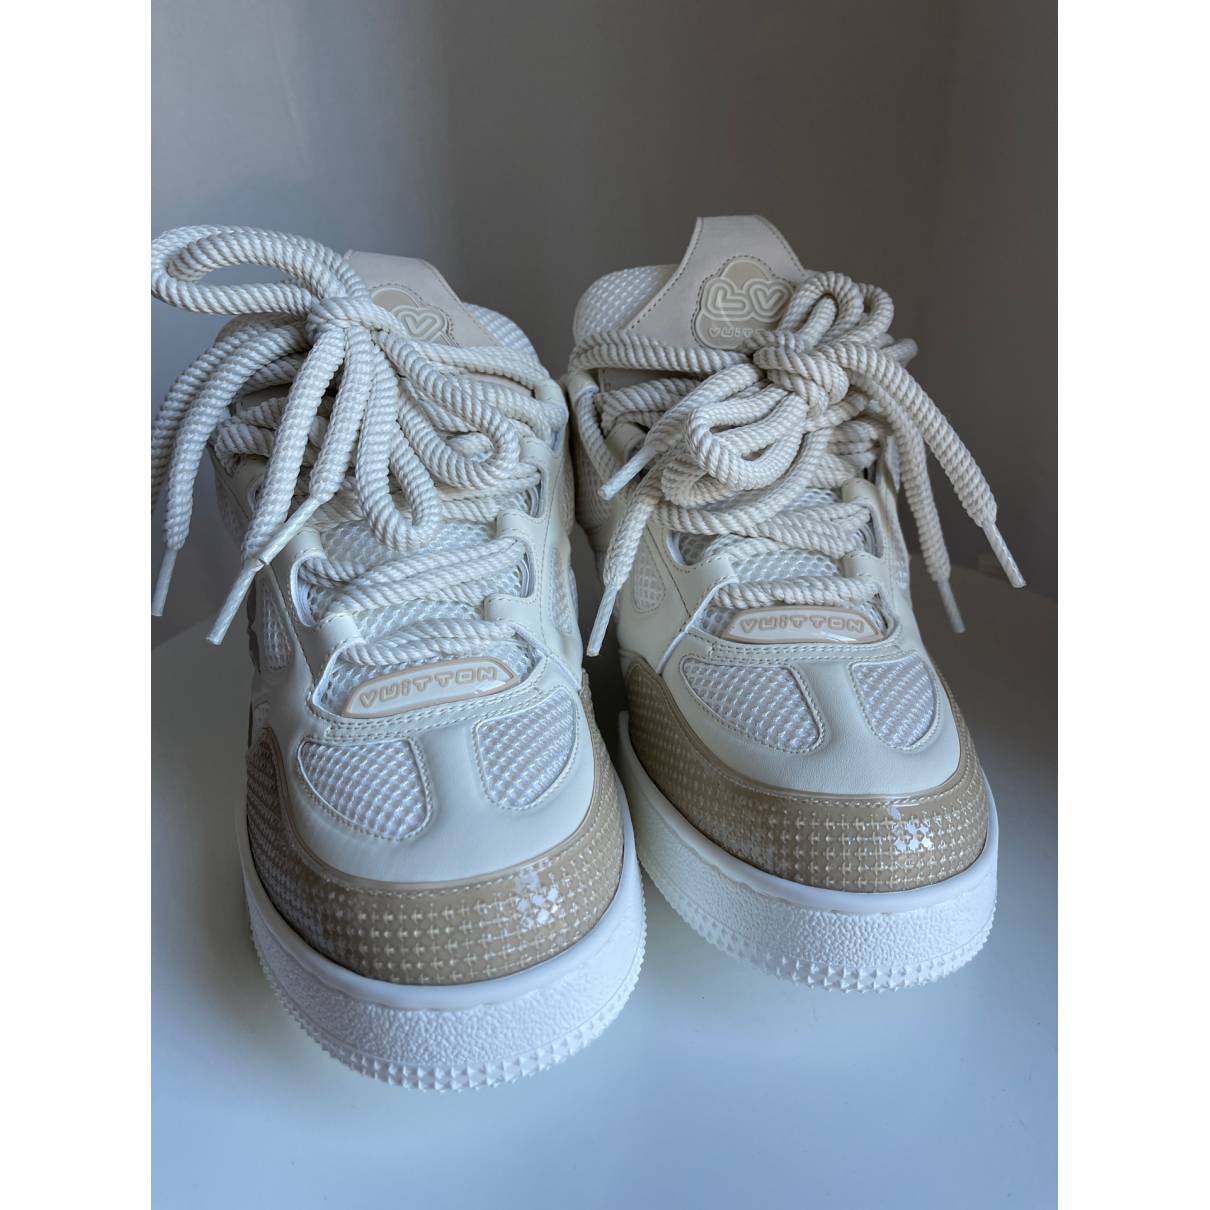 Lv trainer low trainers Louis Vuitton Beige size 40.5 EU in Suede - 34995251